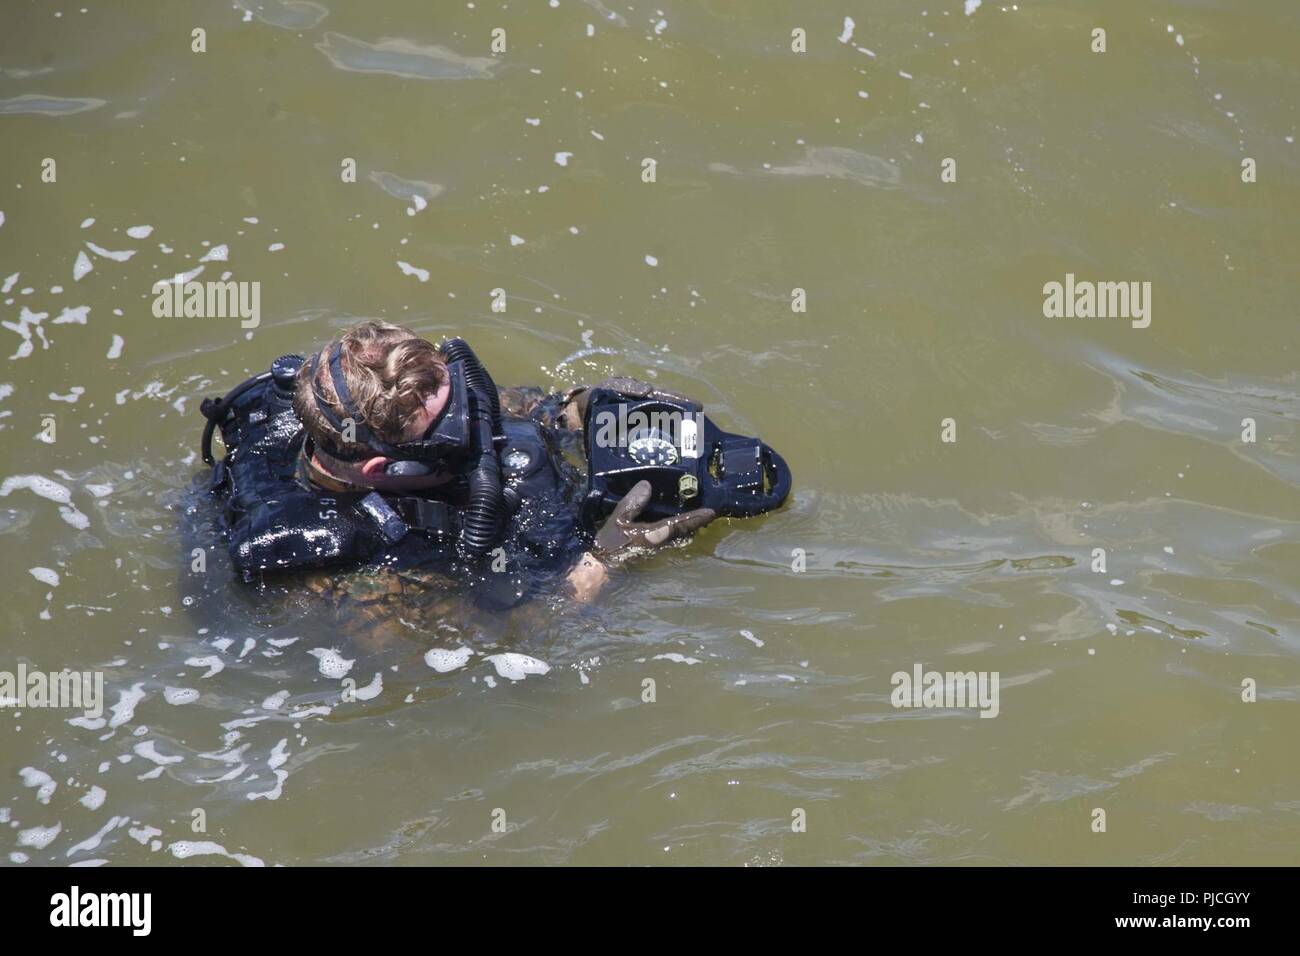 A Recon Marine with the Maritime Raid Force, 22nd Marine Expeditionary Unit gets a heading prior to sub surfacing during a Visit, Board, Search and Seizure course at Fort Eustis, VA, July 18, 2018. This course gives the MRF the capability of launching VBSS operations during the 22nd MEU’s upcoming deployment. Stock Photo